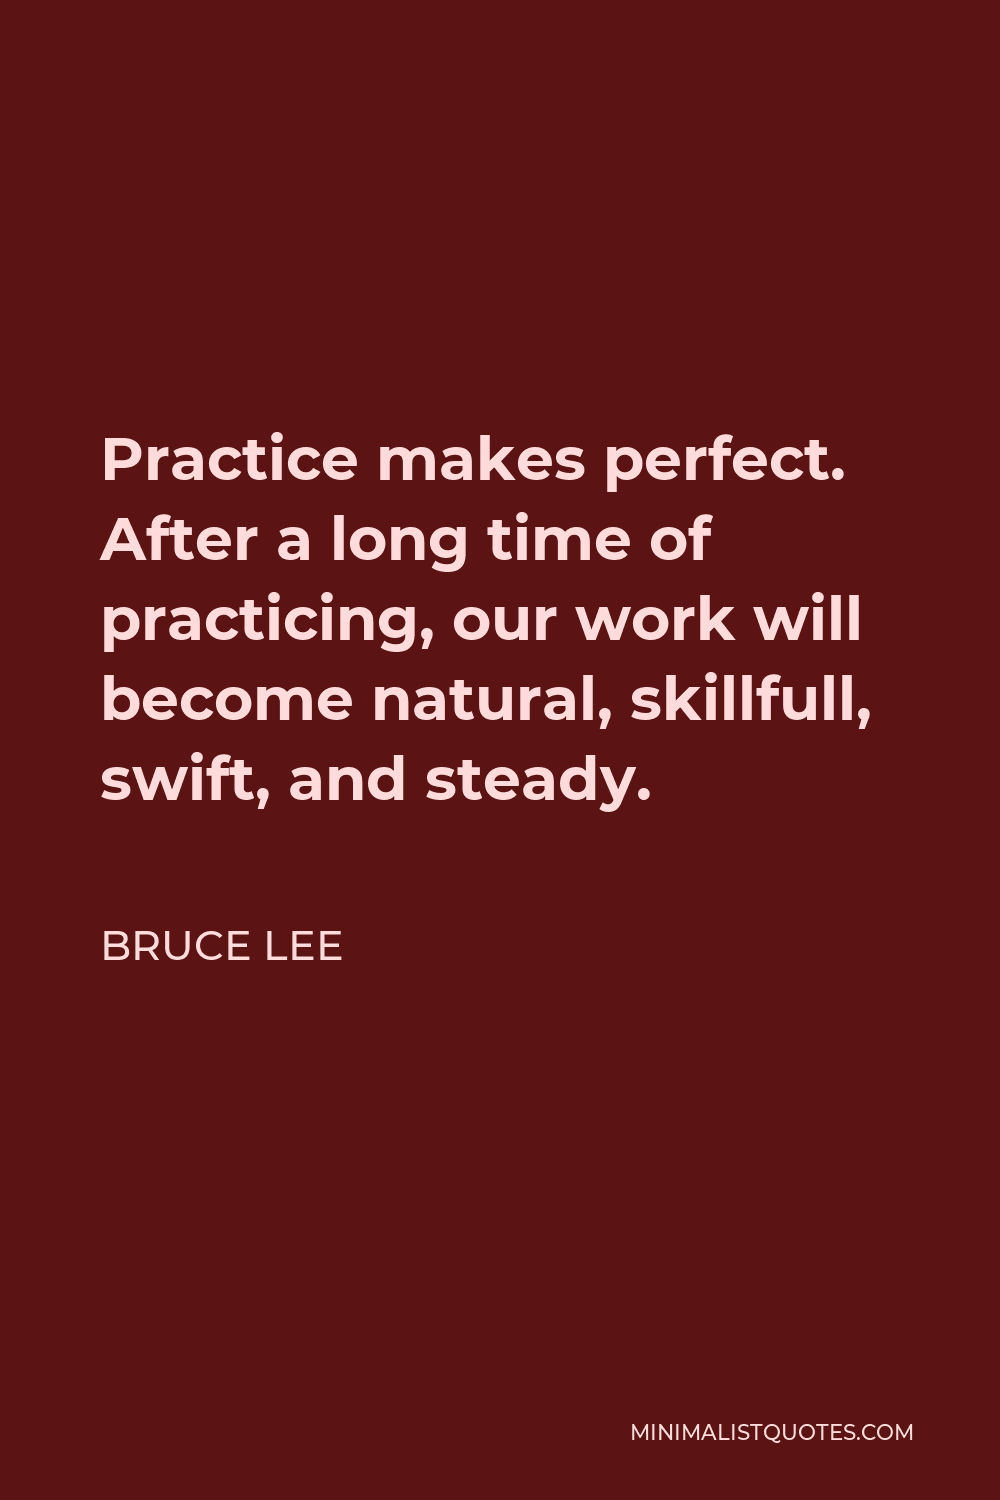 Bruce Lee Quote - Practice makes perfect. After a long time of practicing, our work will become natural, skillfull, swift, and steady.